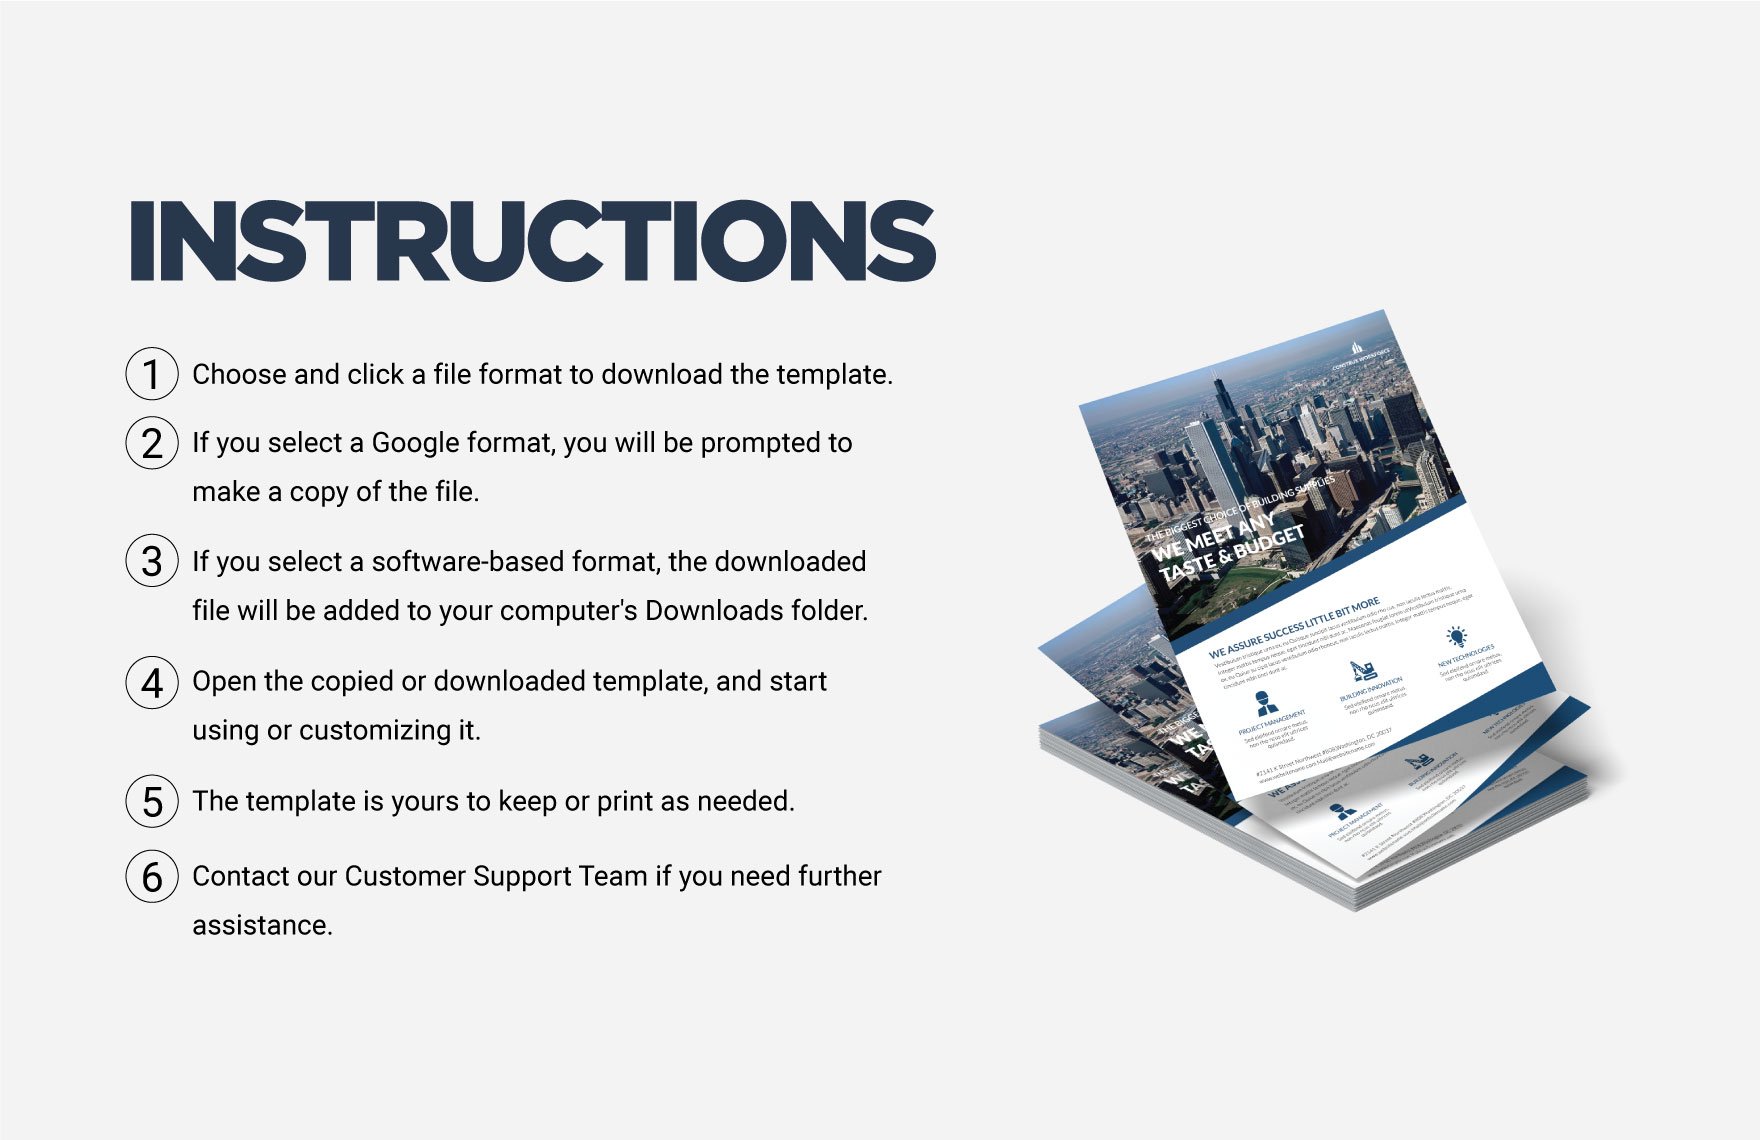 Editable Architecture Flyer Template